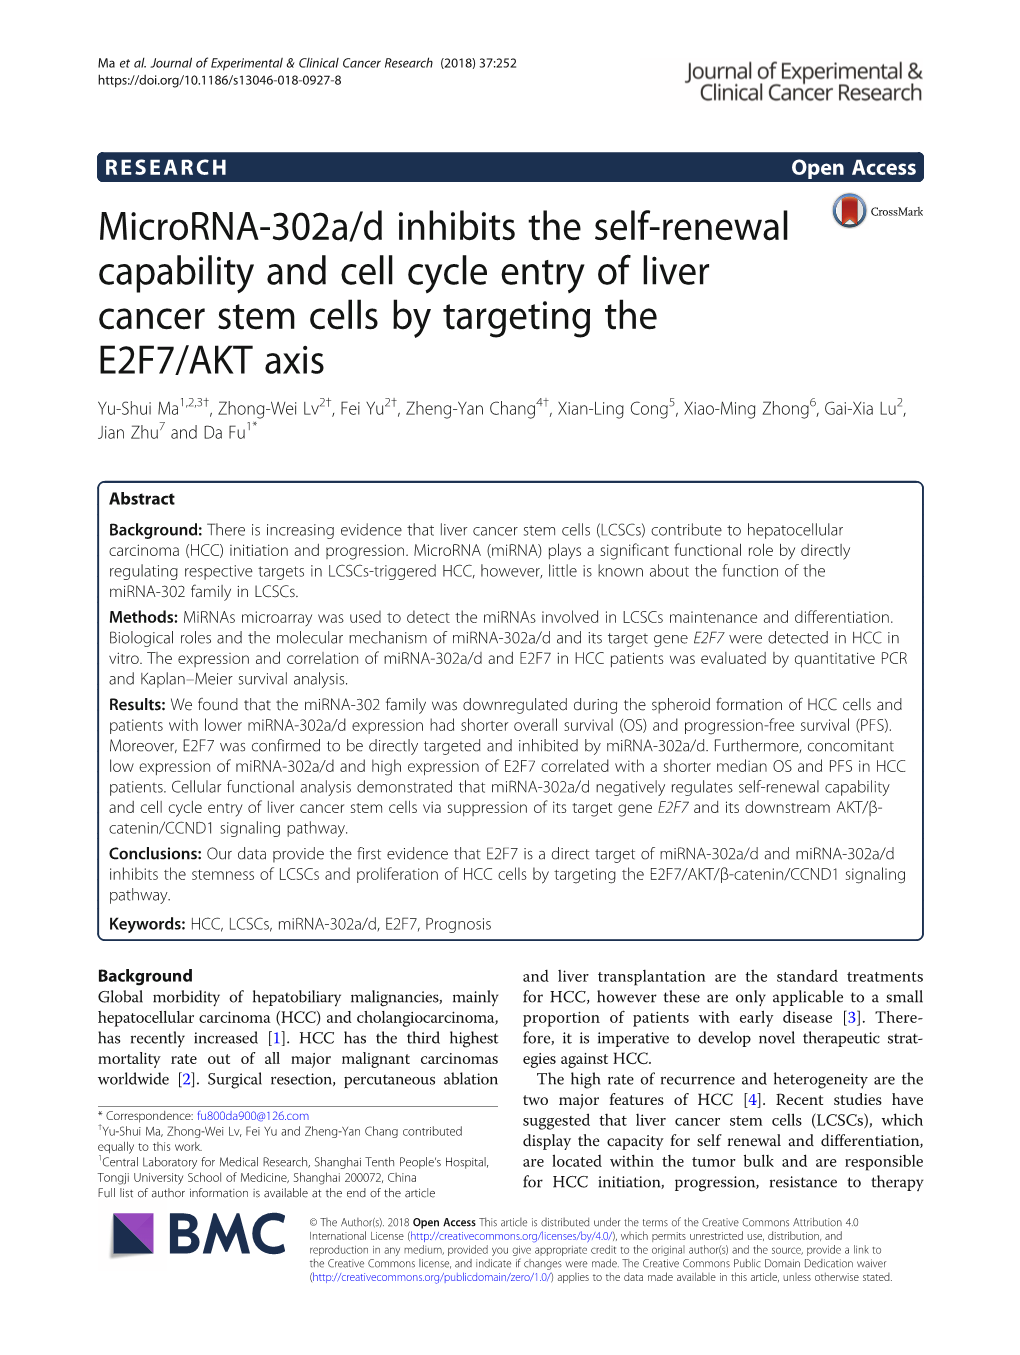 Microrna-302A/D Inhibits the Self-Renewal Capability and Cell Cycle Entry of Liver Cancer Stem Cells by Targeting the E2F7/AKT A